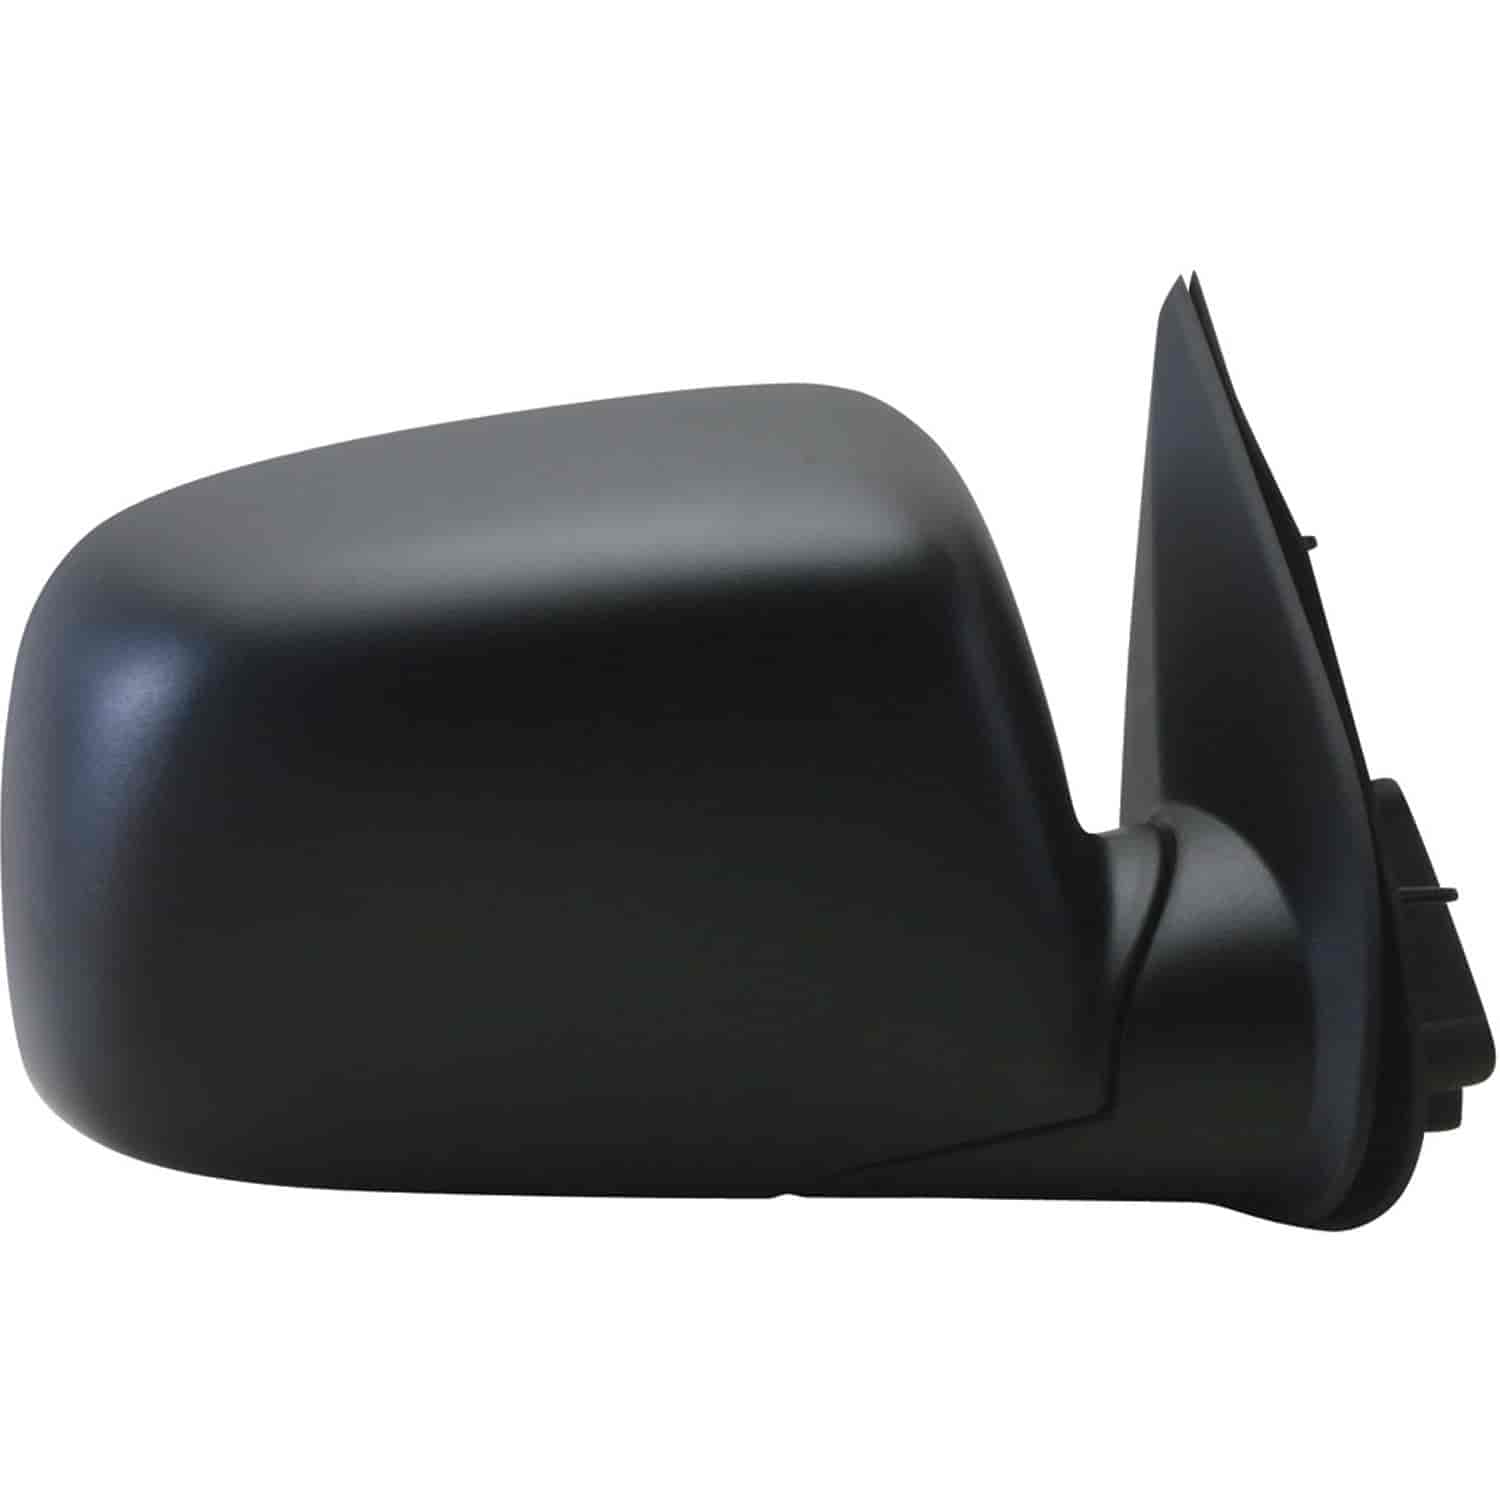 OEM Style Replacement mirror for 04-12 Chevy Colorado